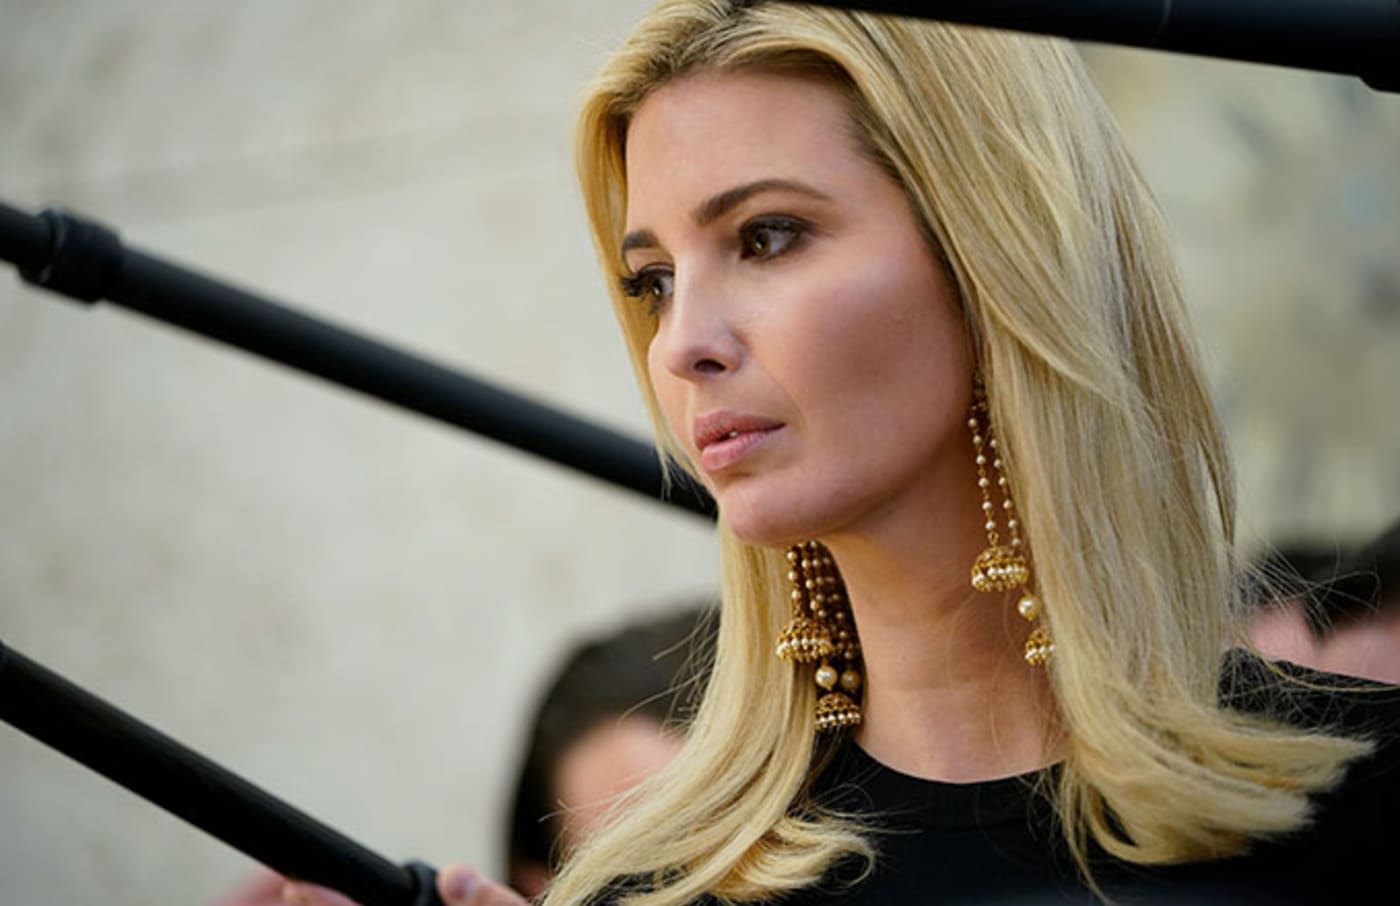 This is a photo of Ivanka Trump.